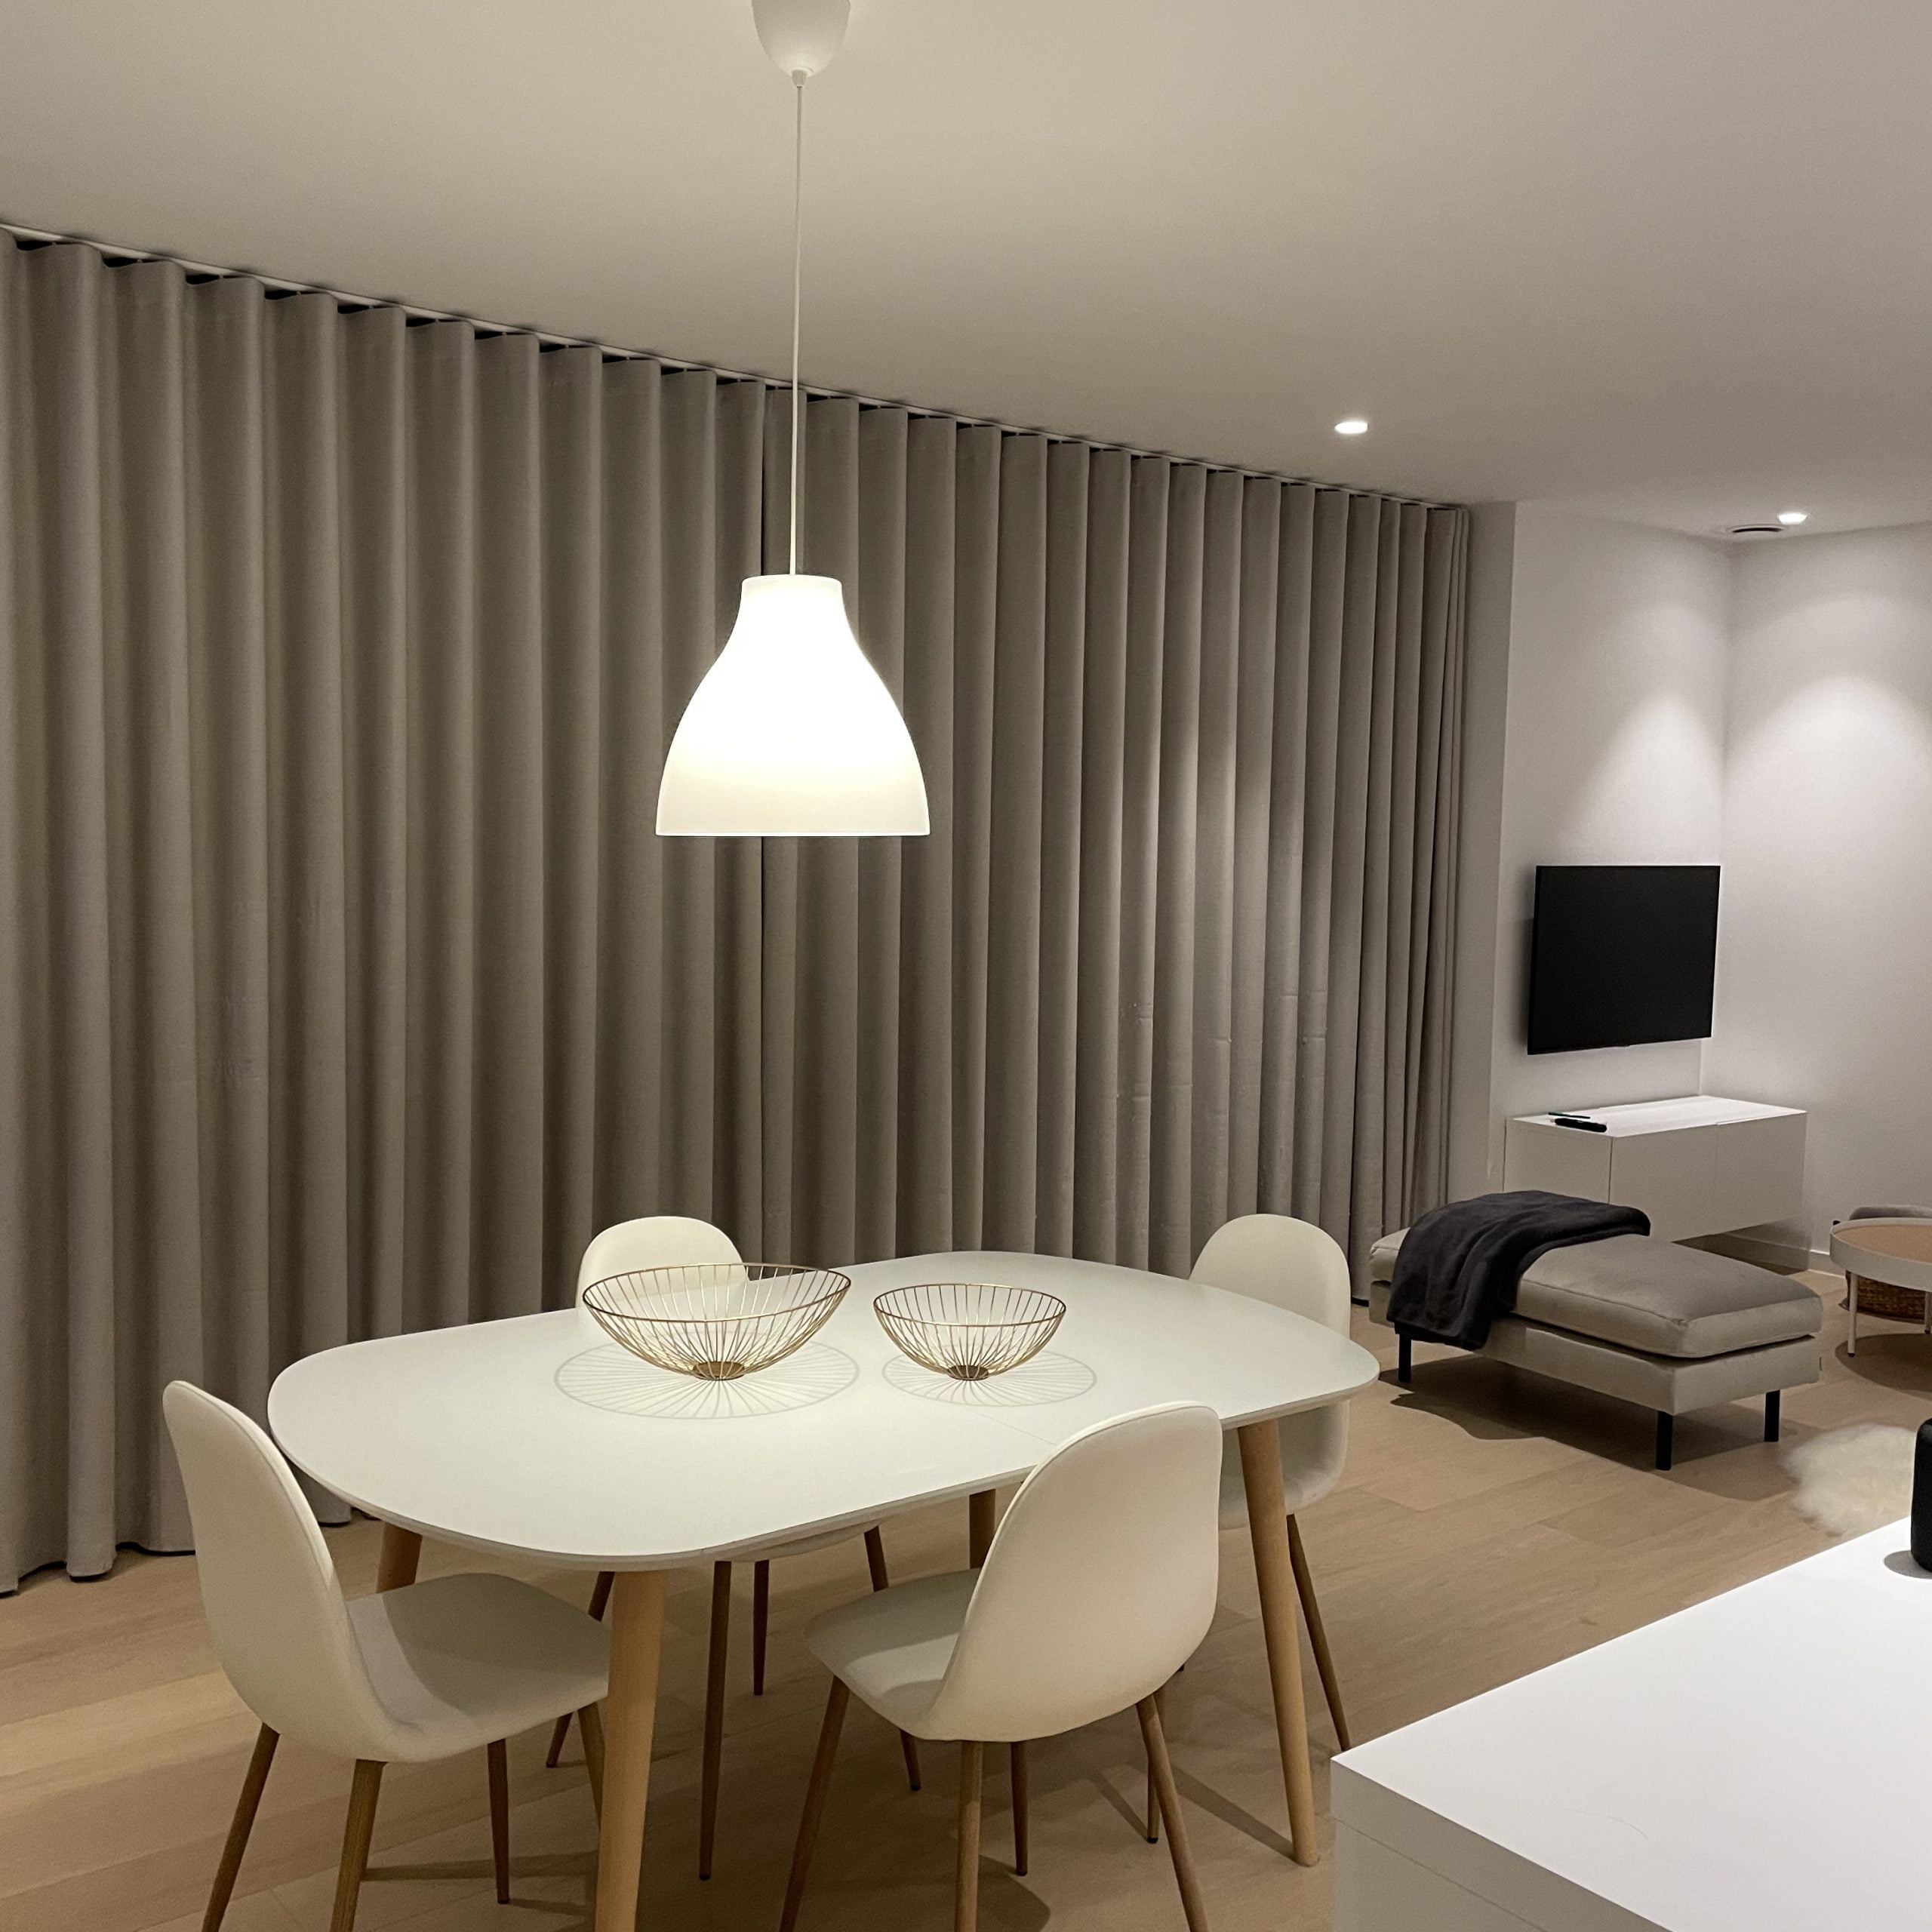 Melle - Lovely expat luxury apartment in Ghent